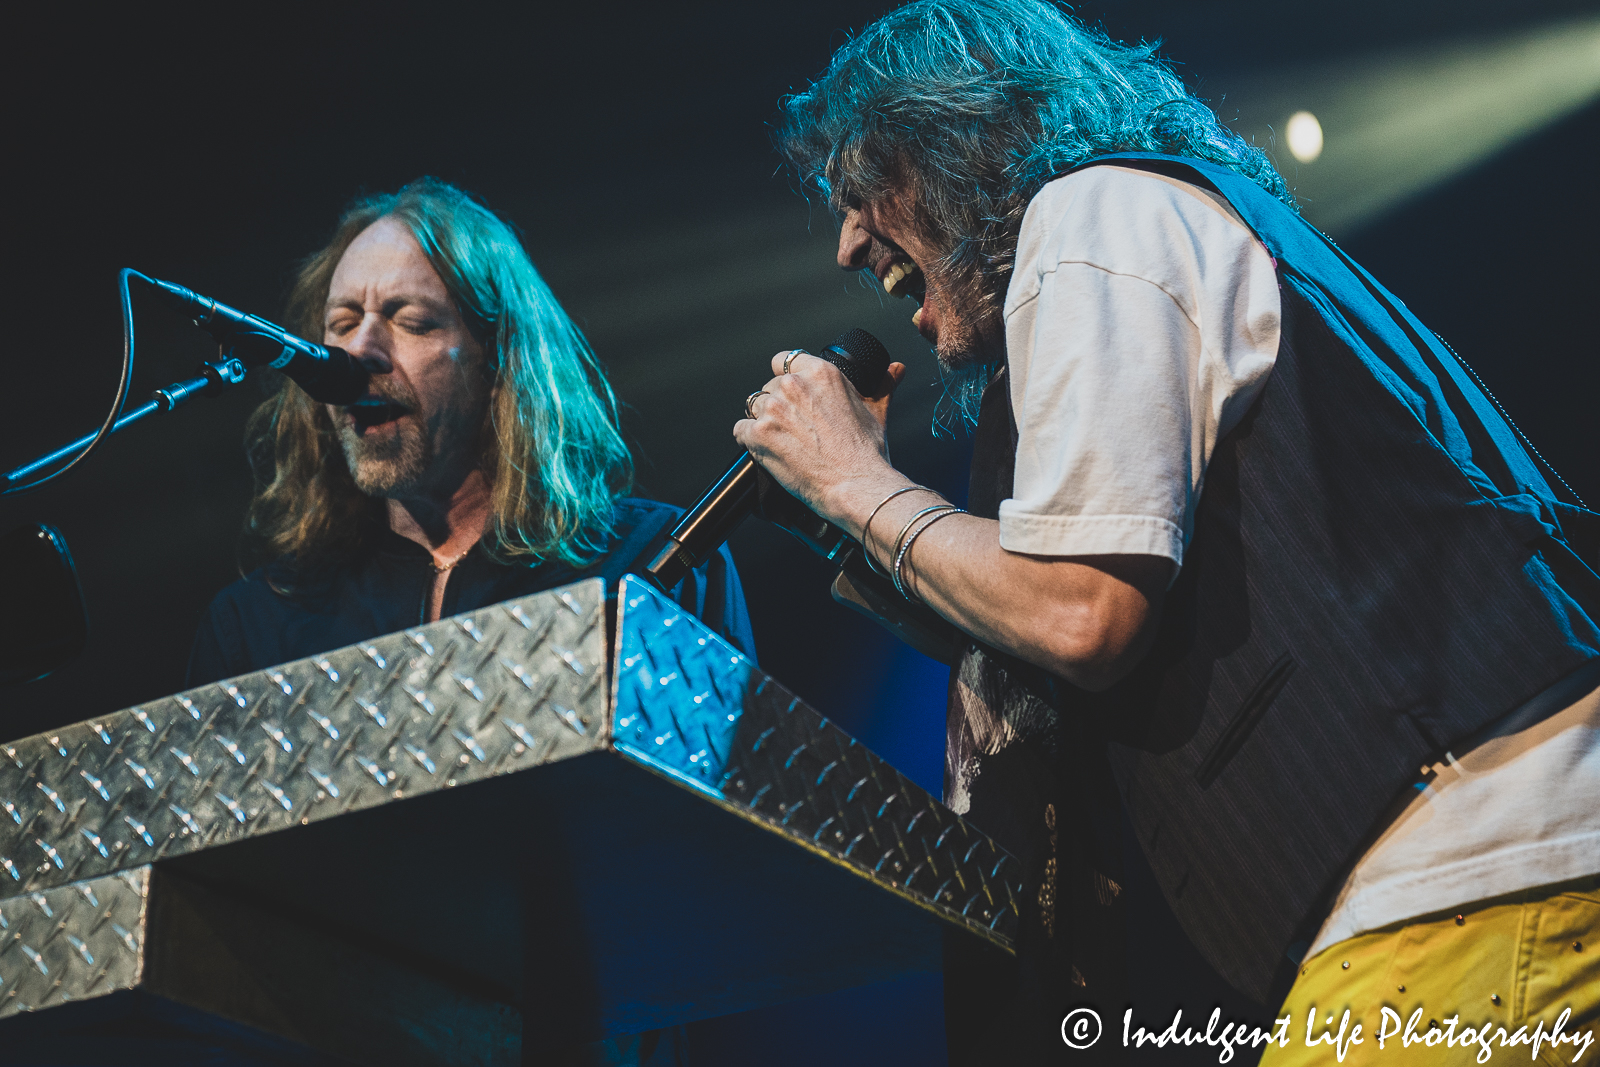 Foreigner frontman Kelly Hansen performing "Cold as Ice" with Jeff Pilson on the keyboards at Landon Arena in Topeka, KS on May 2, 2023.